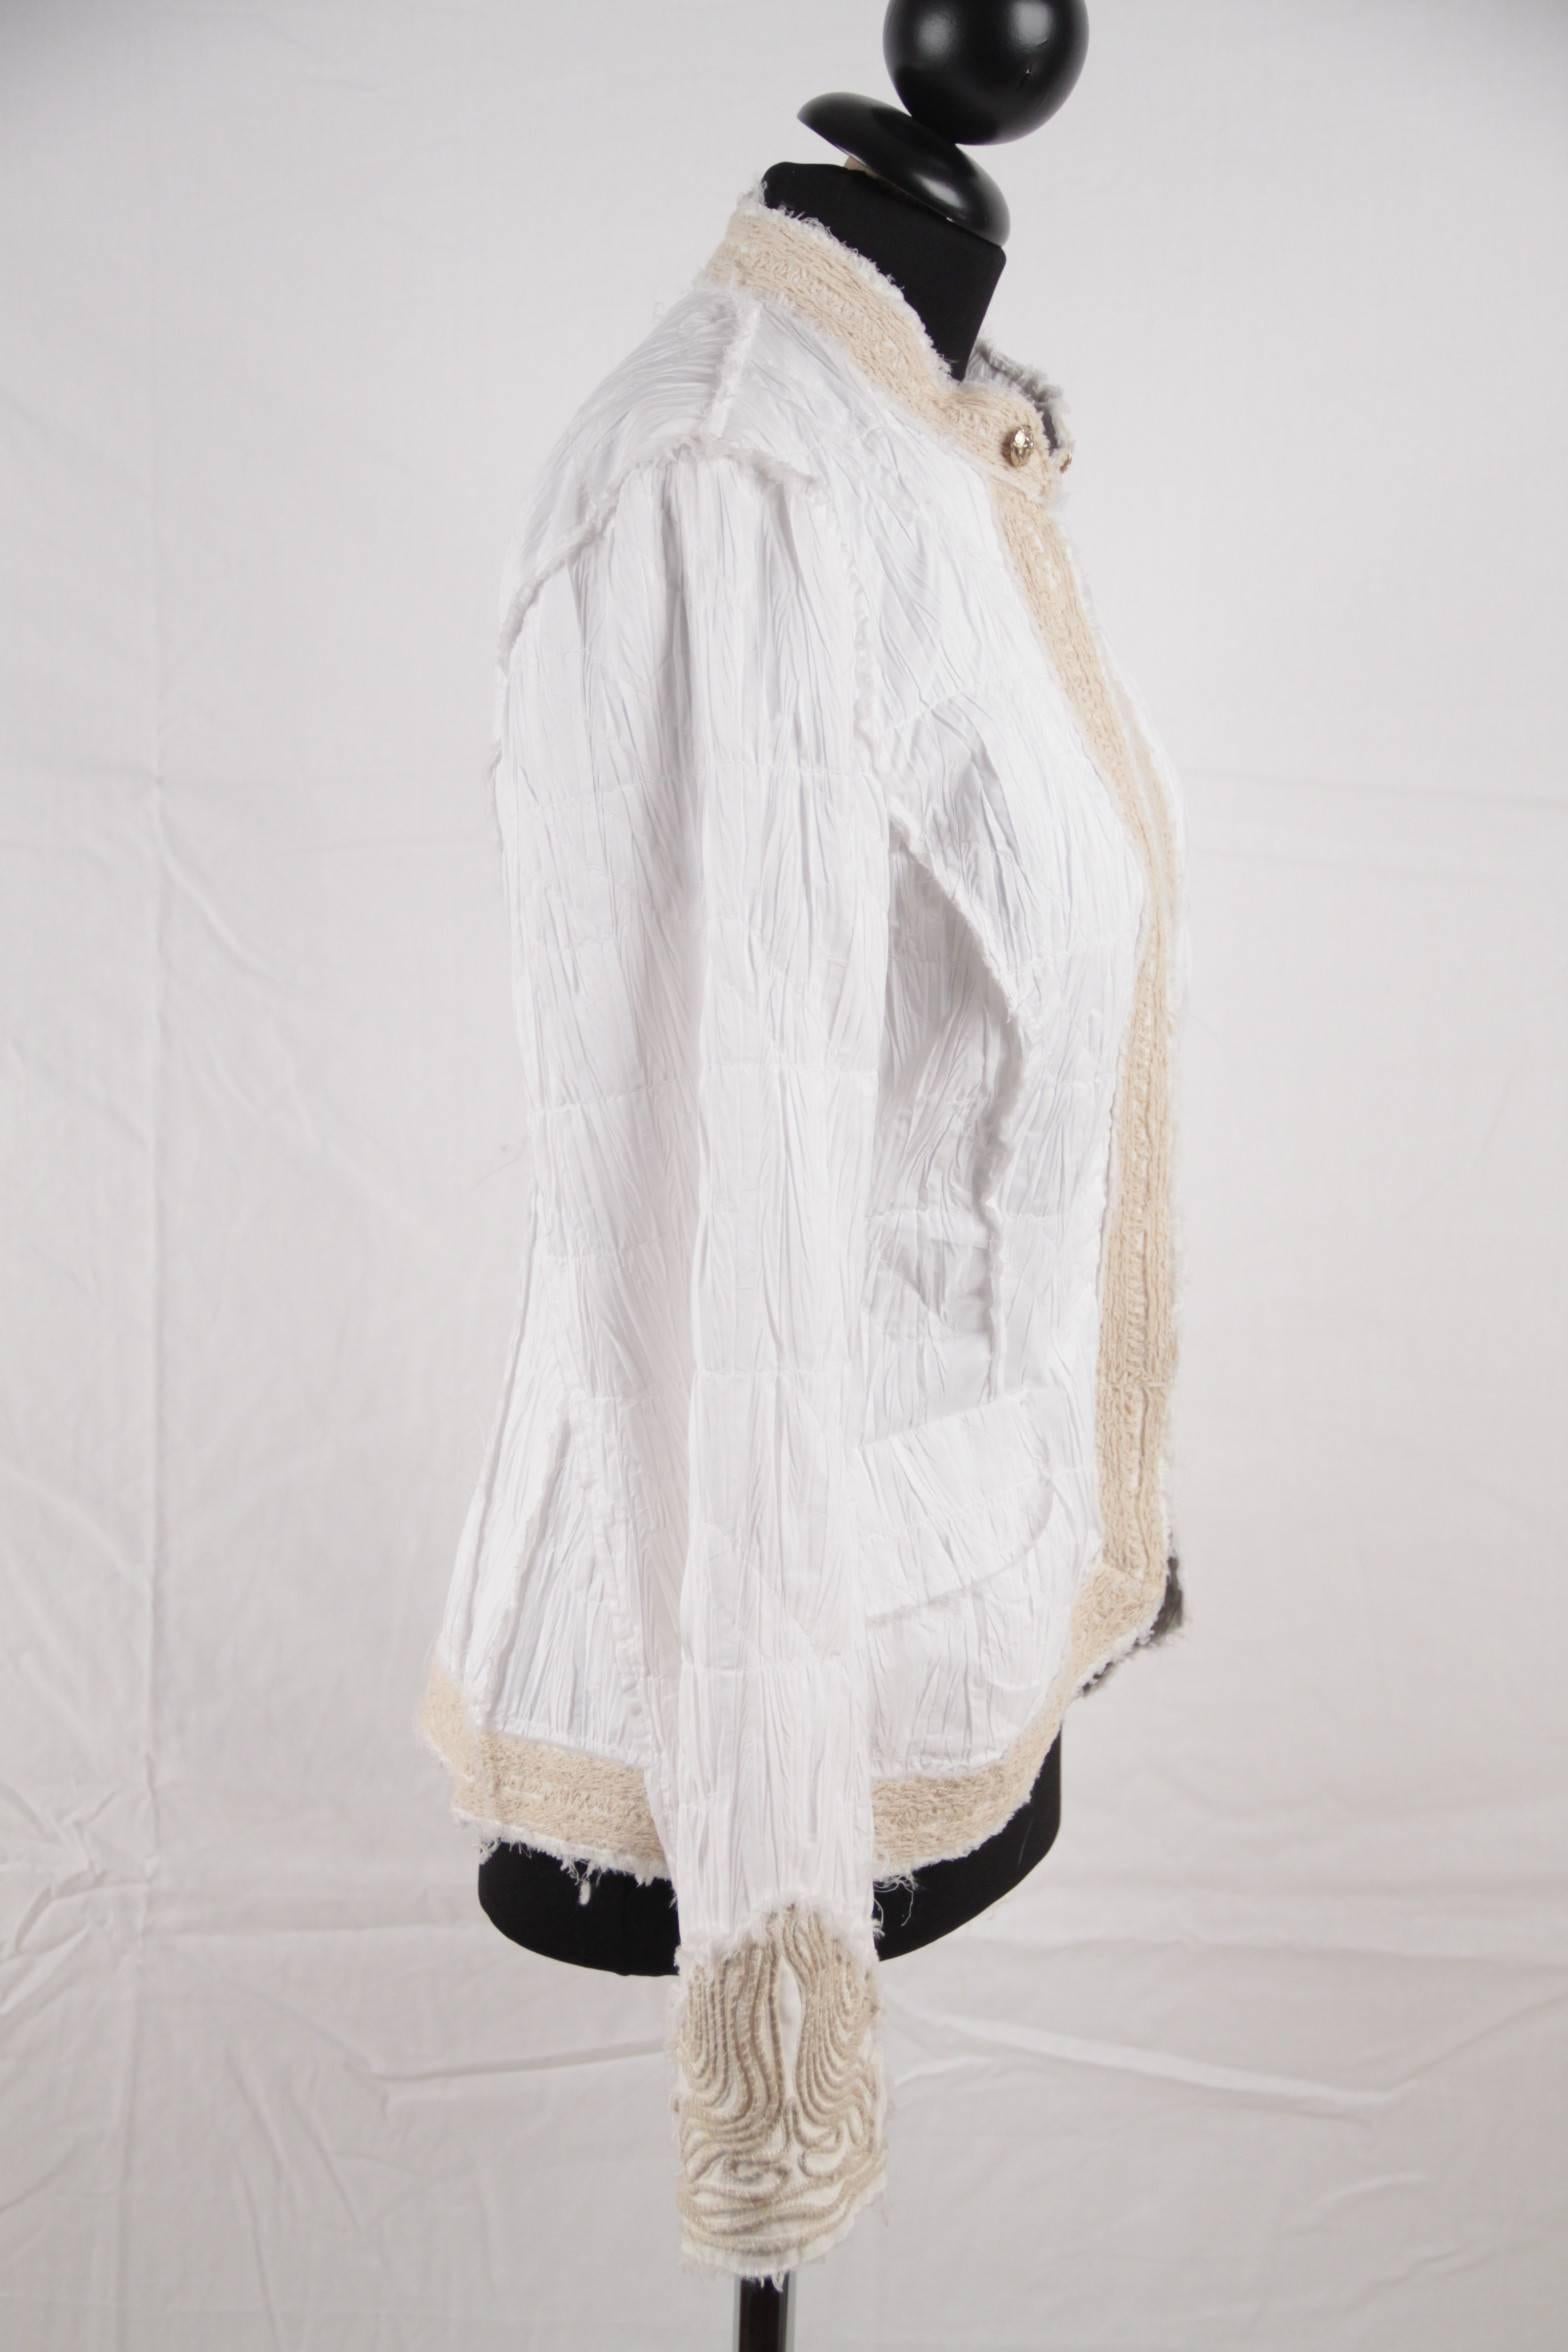 ERMANNO DAELLI White Crinckled COLLARLESS JACKET w/ Embroidery SIZE 44 1